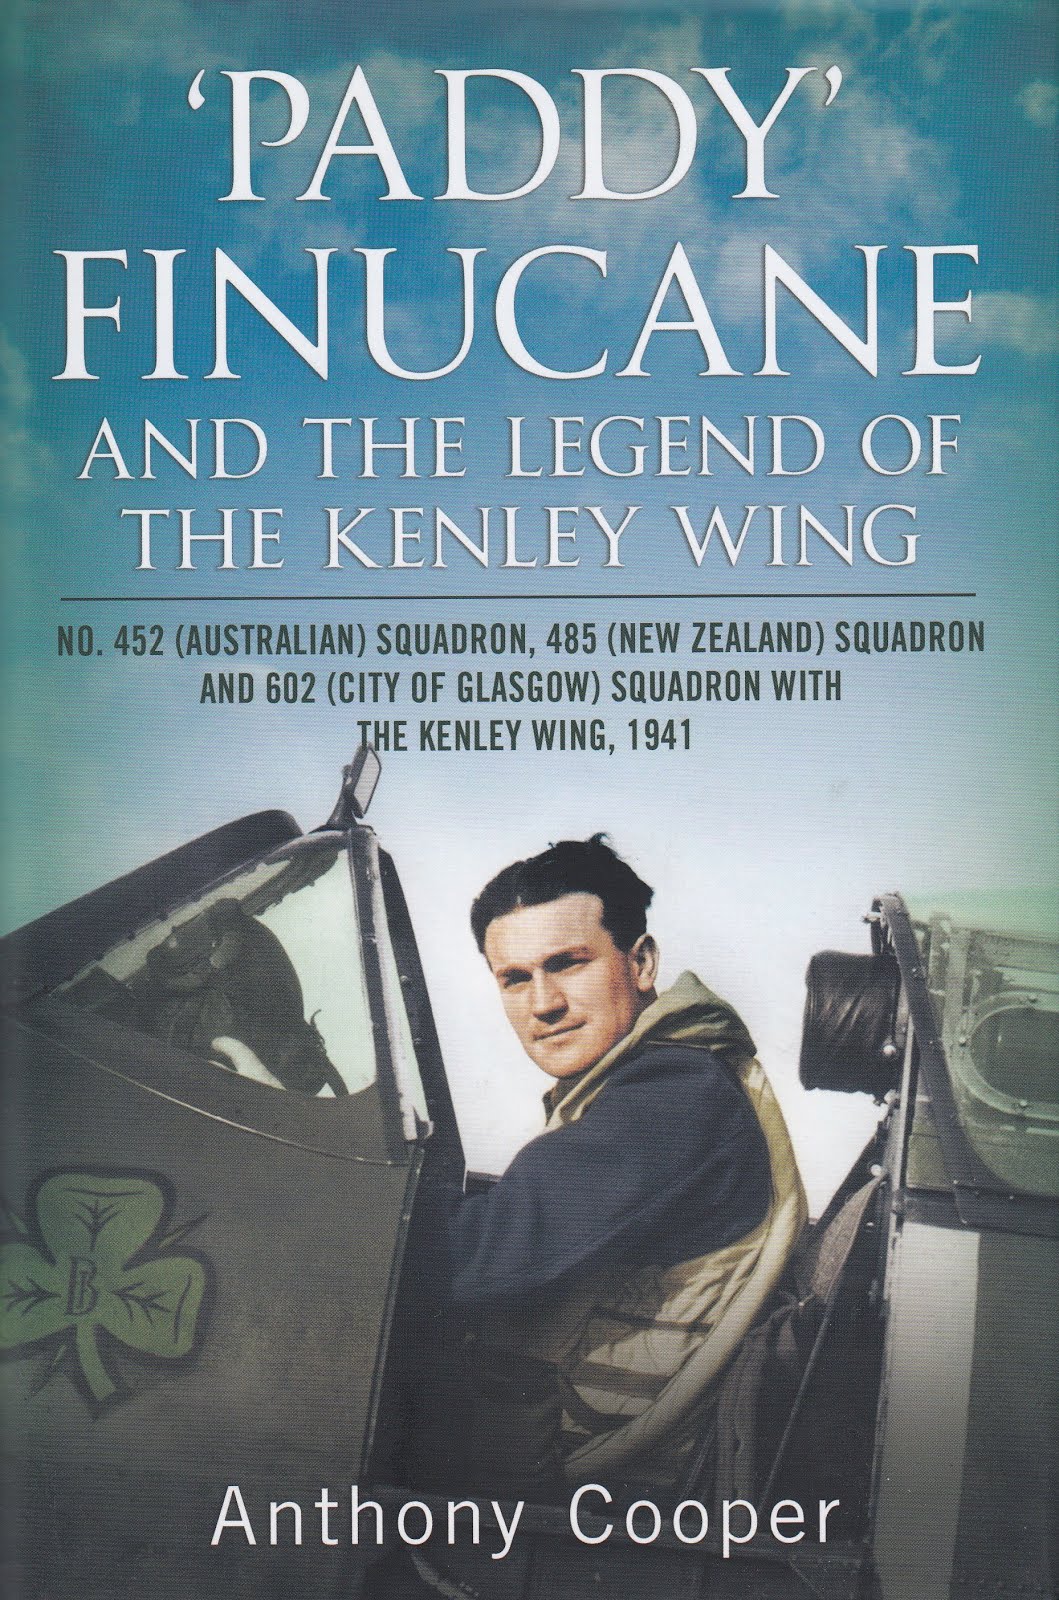 'Paddy' Finucane and the Legend of the Kenley Wing